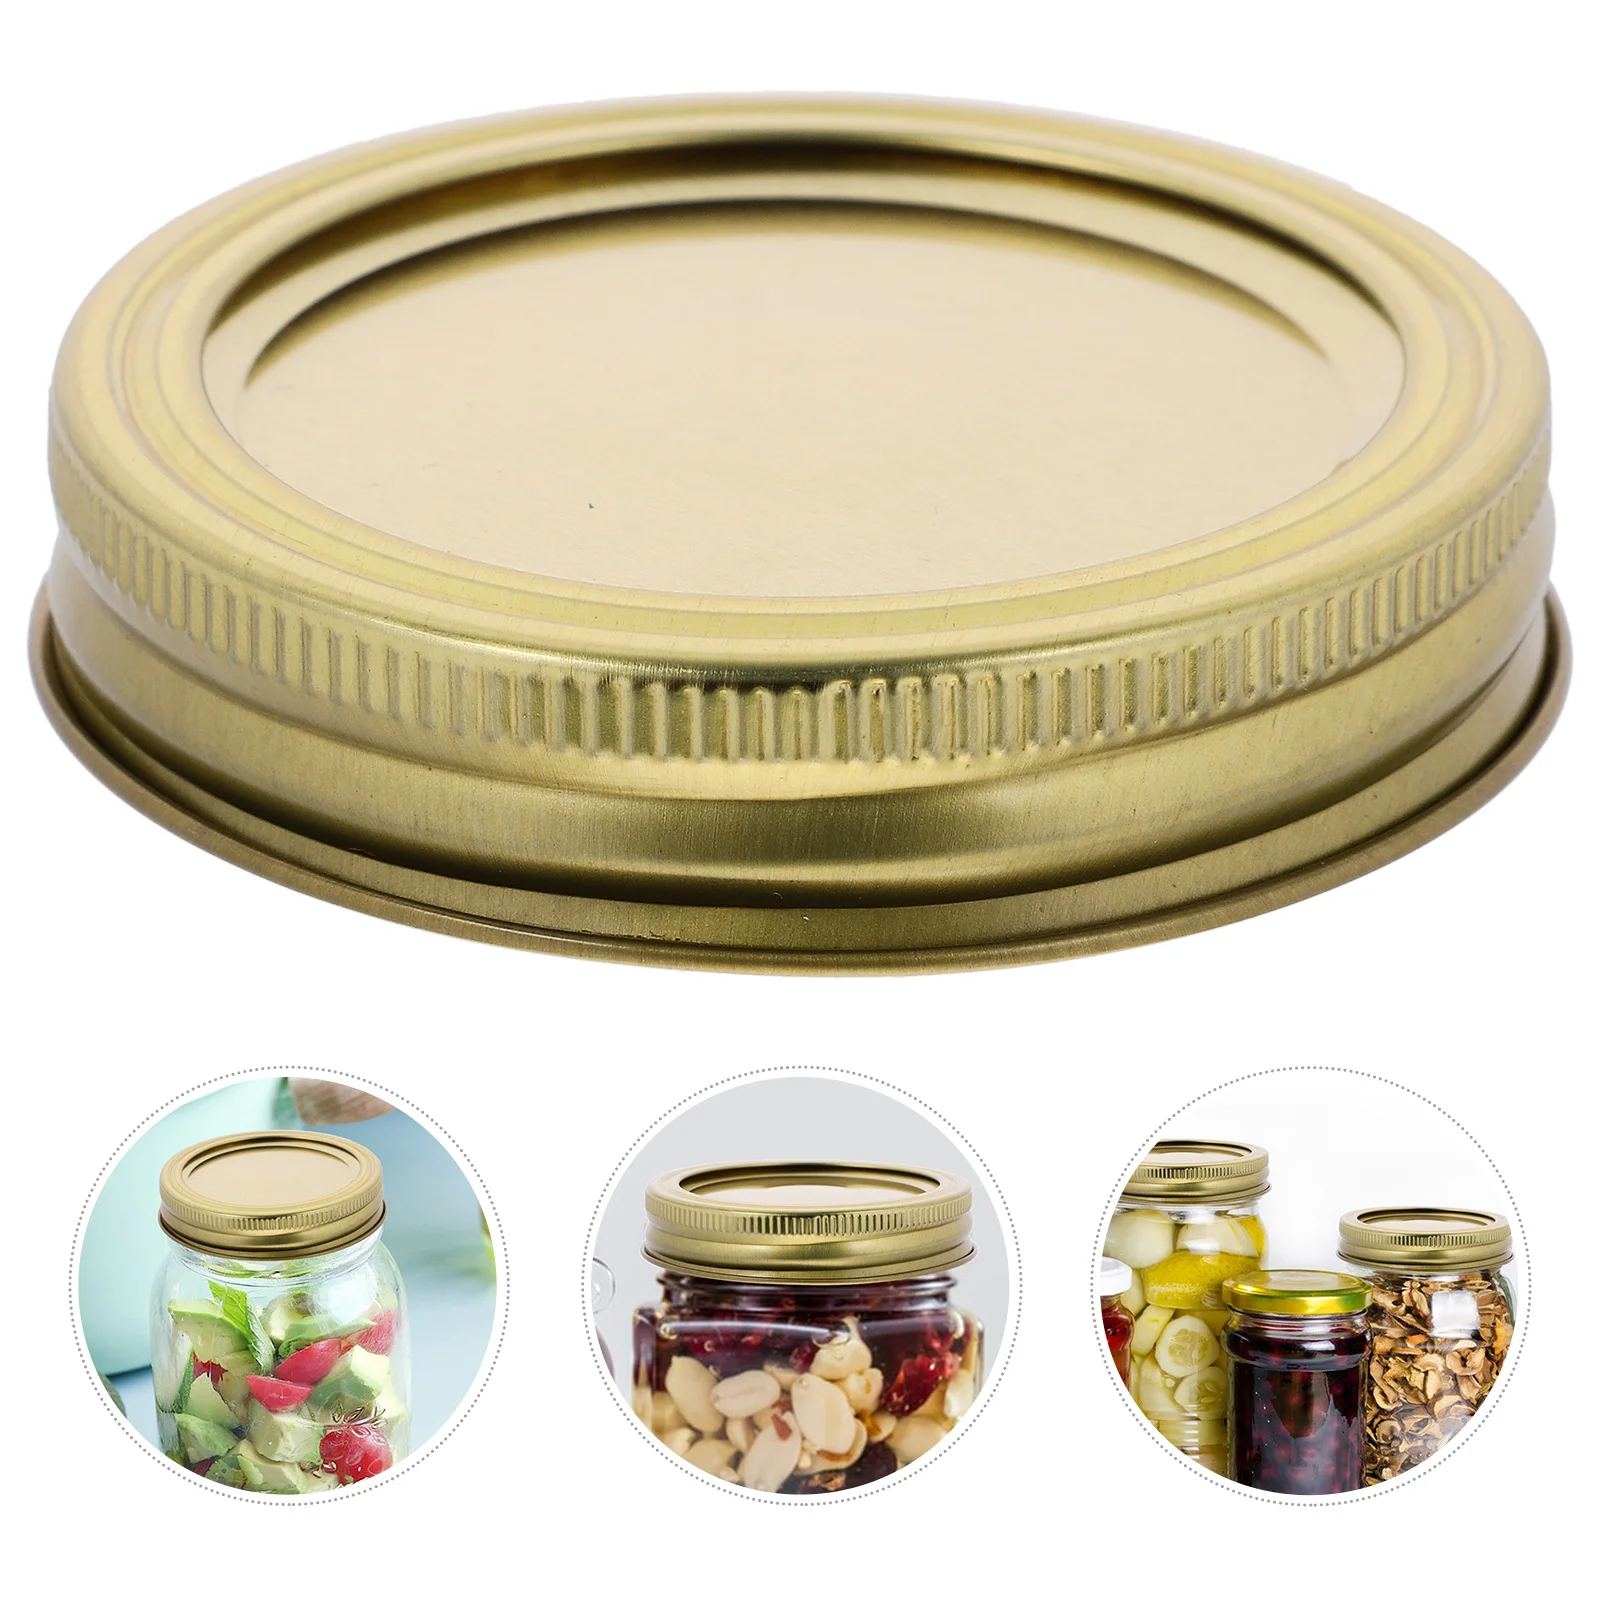 

12 Set Wide Mouth Canning Lids Sturdy Covers Rings Mason Jar Regular Iron Replacement